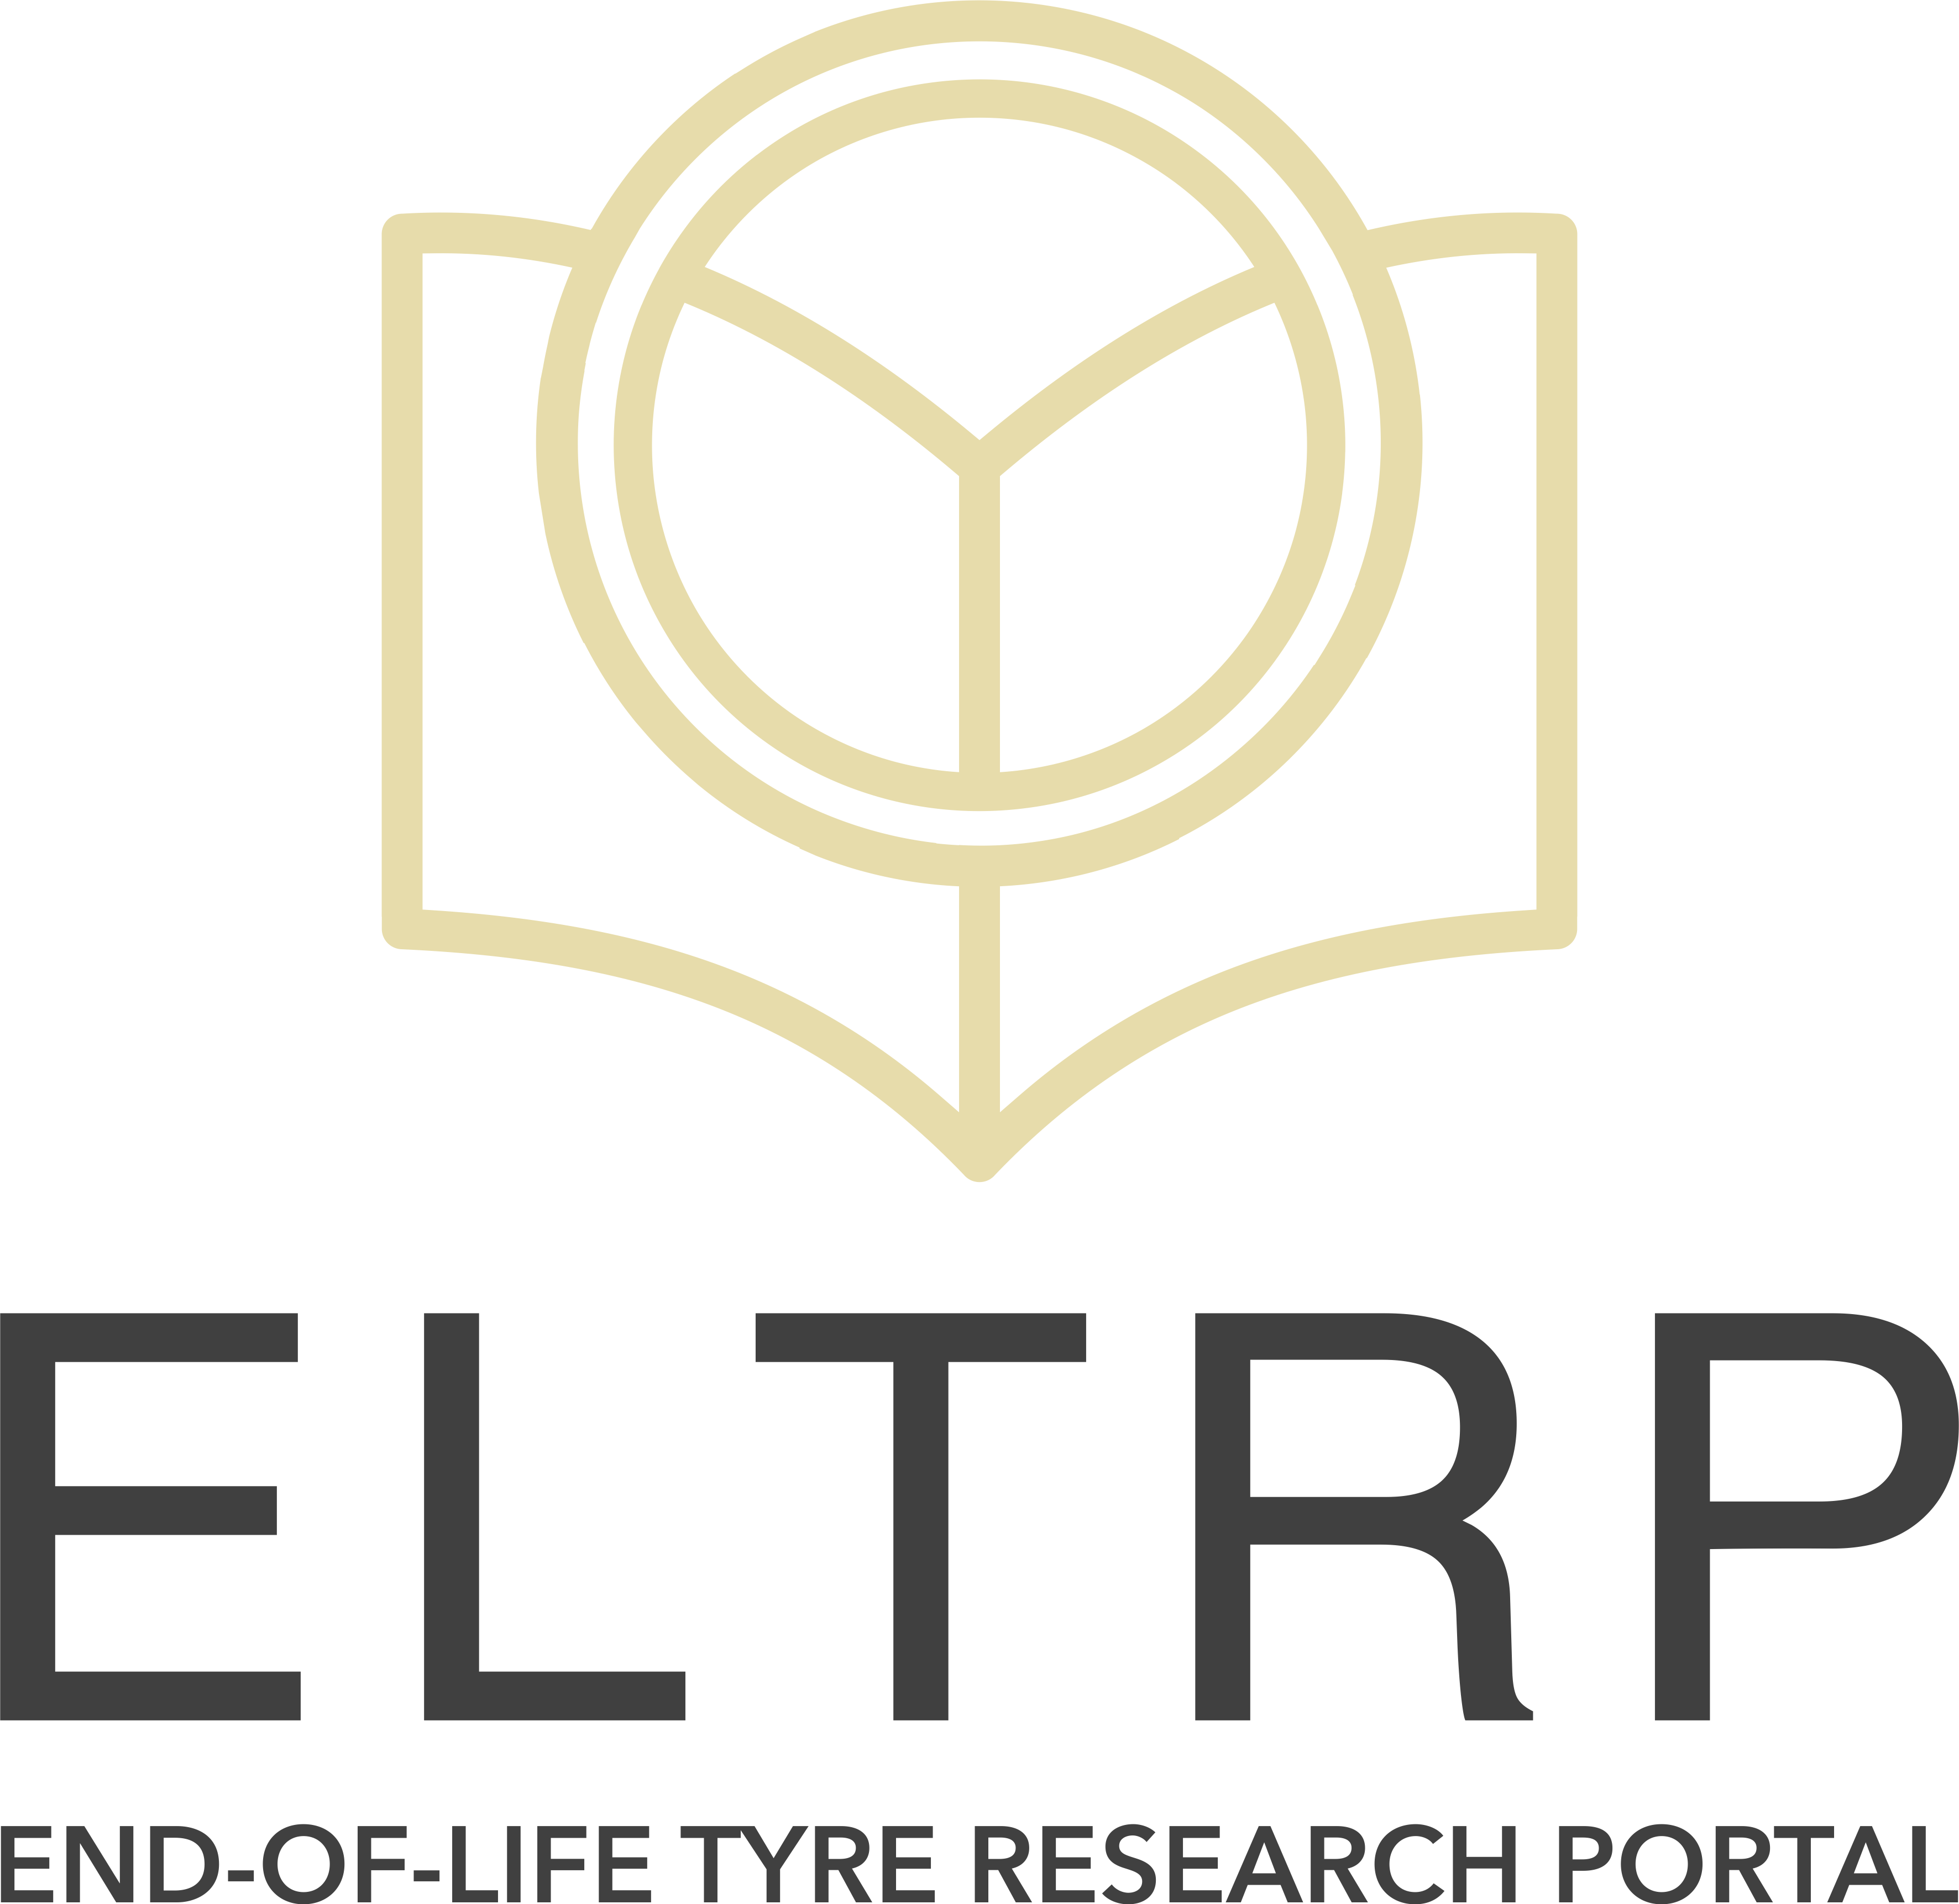 End-of-life tyre research portal (ELTRP) : The world’s first research portal for recycled tyre rubber